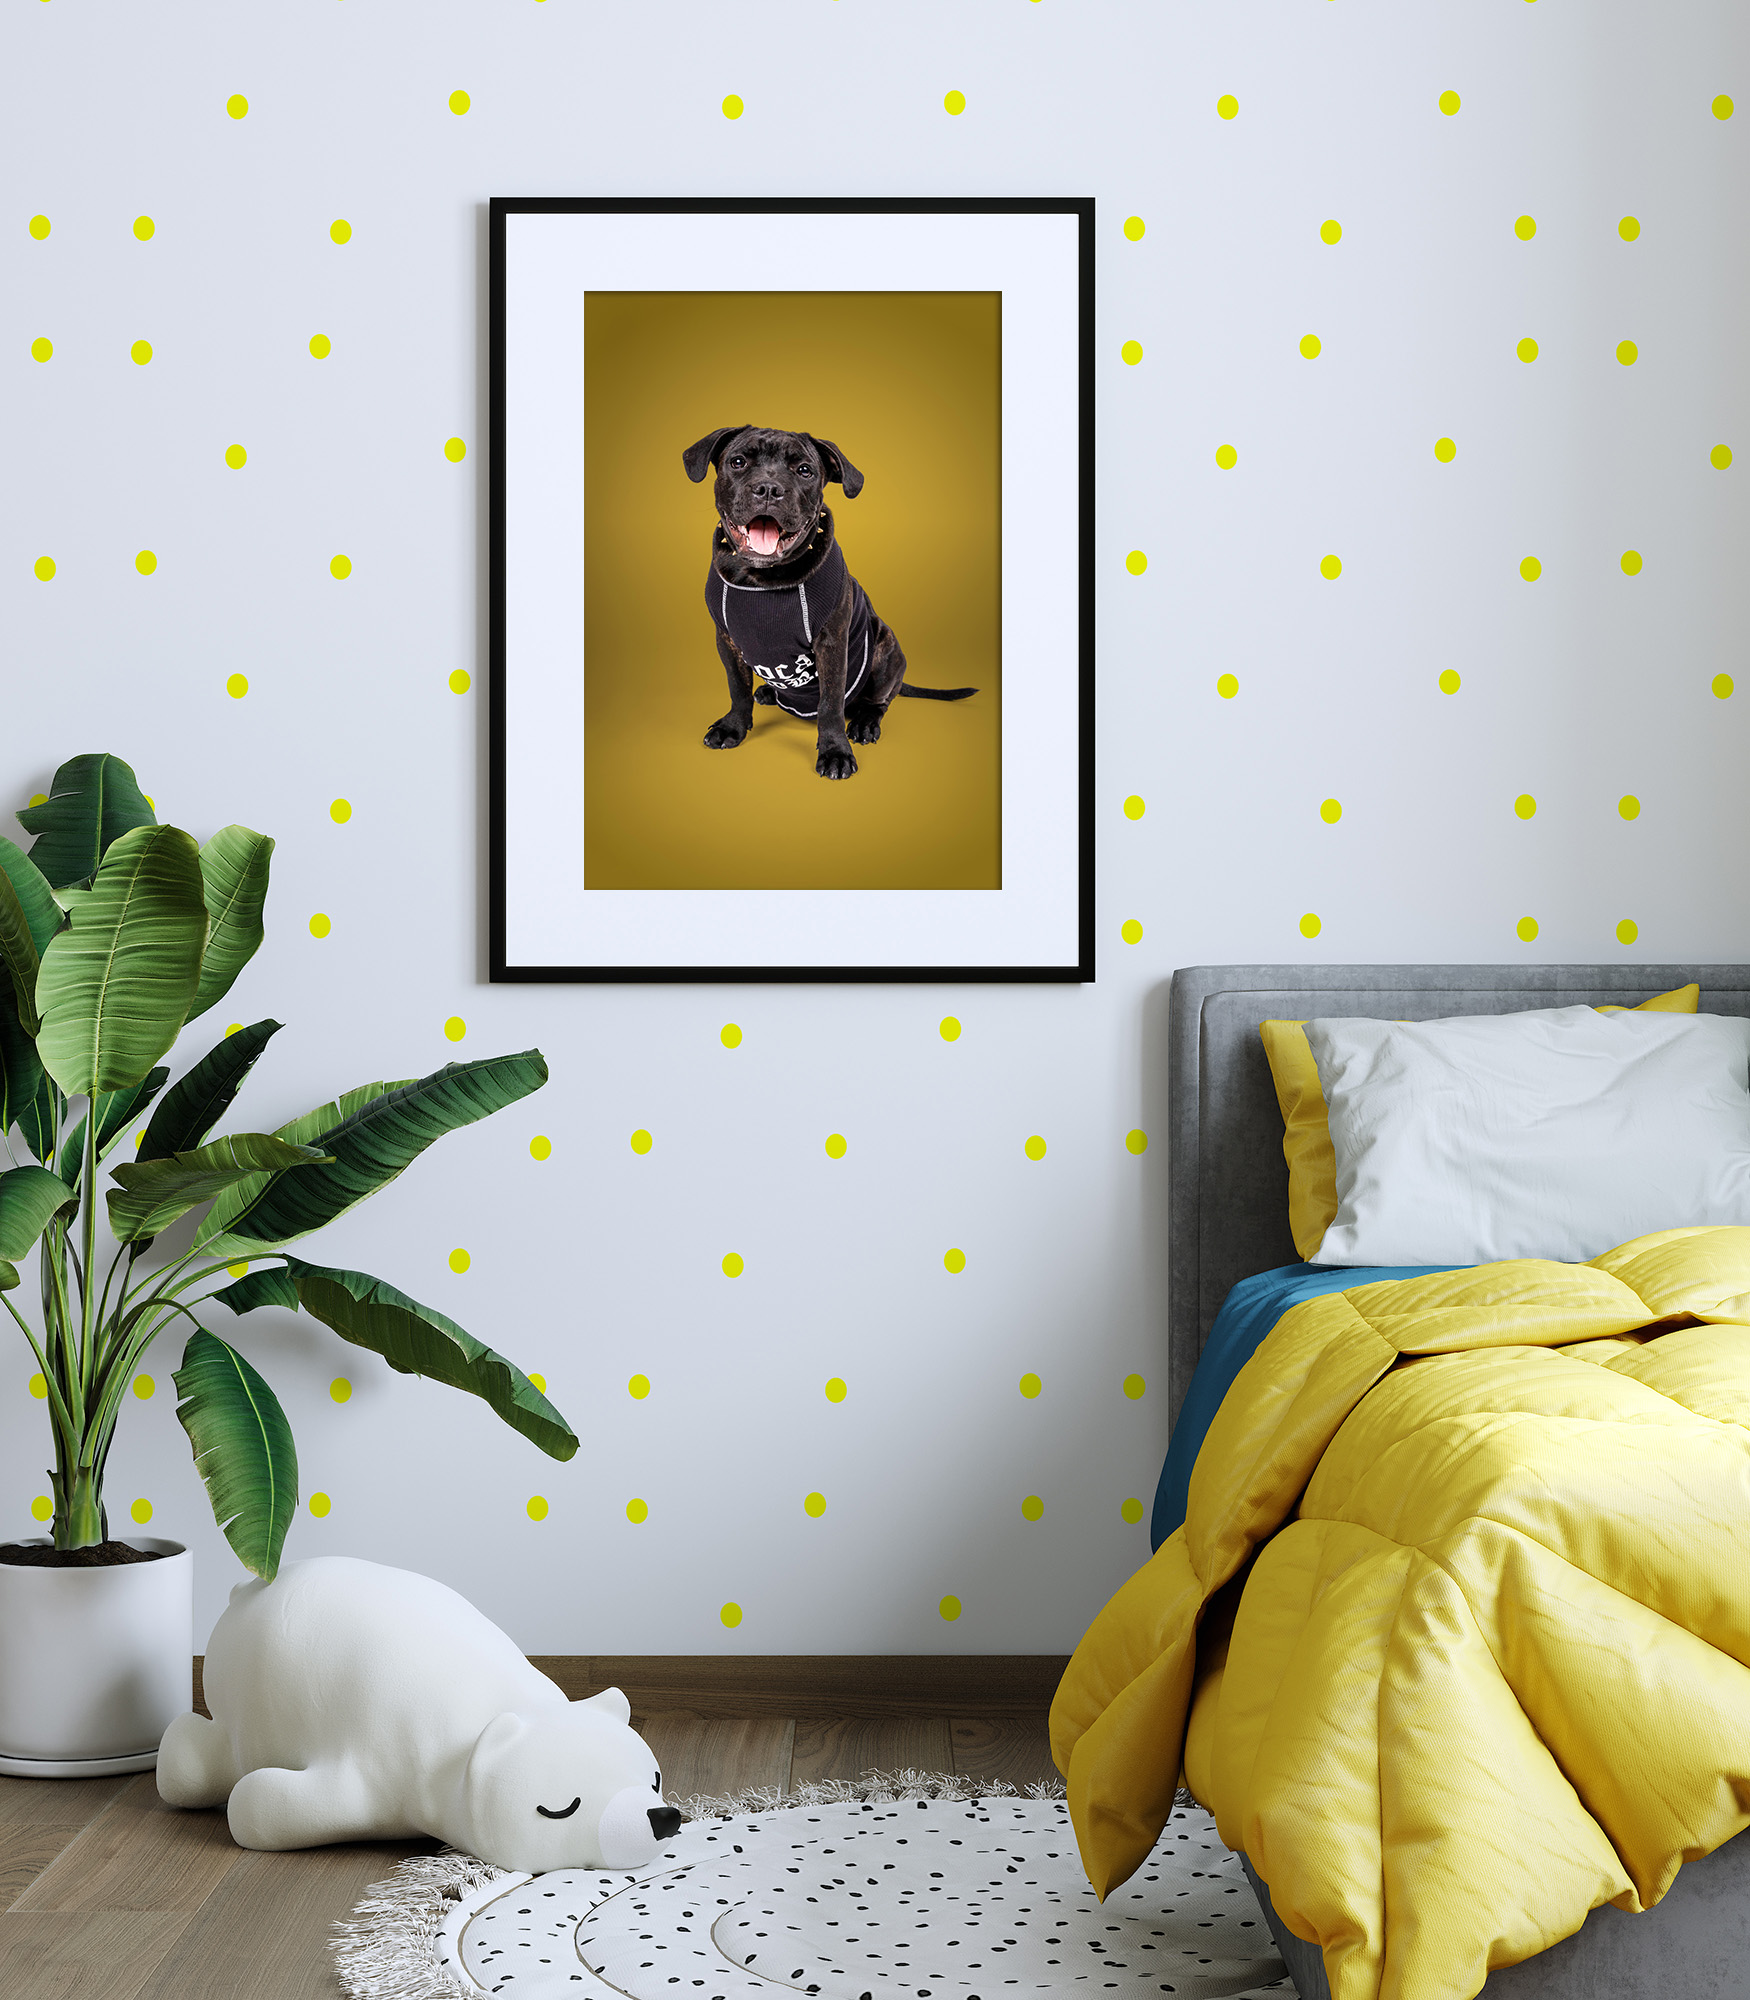 Bright yellow kids bedroom with yellow puppy wall art.